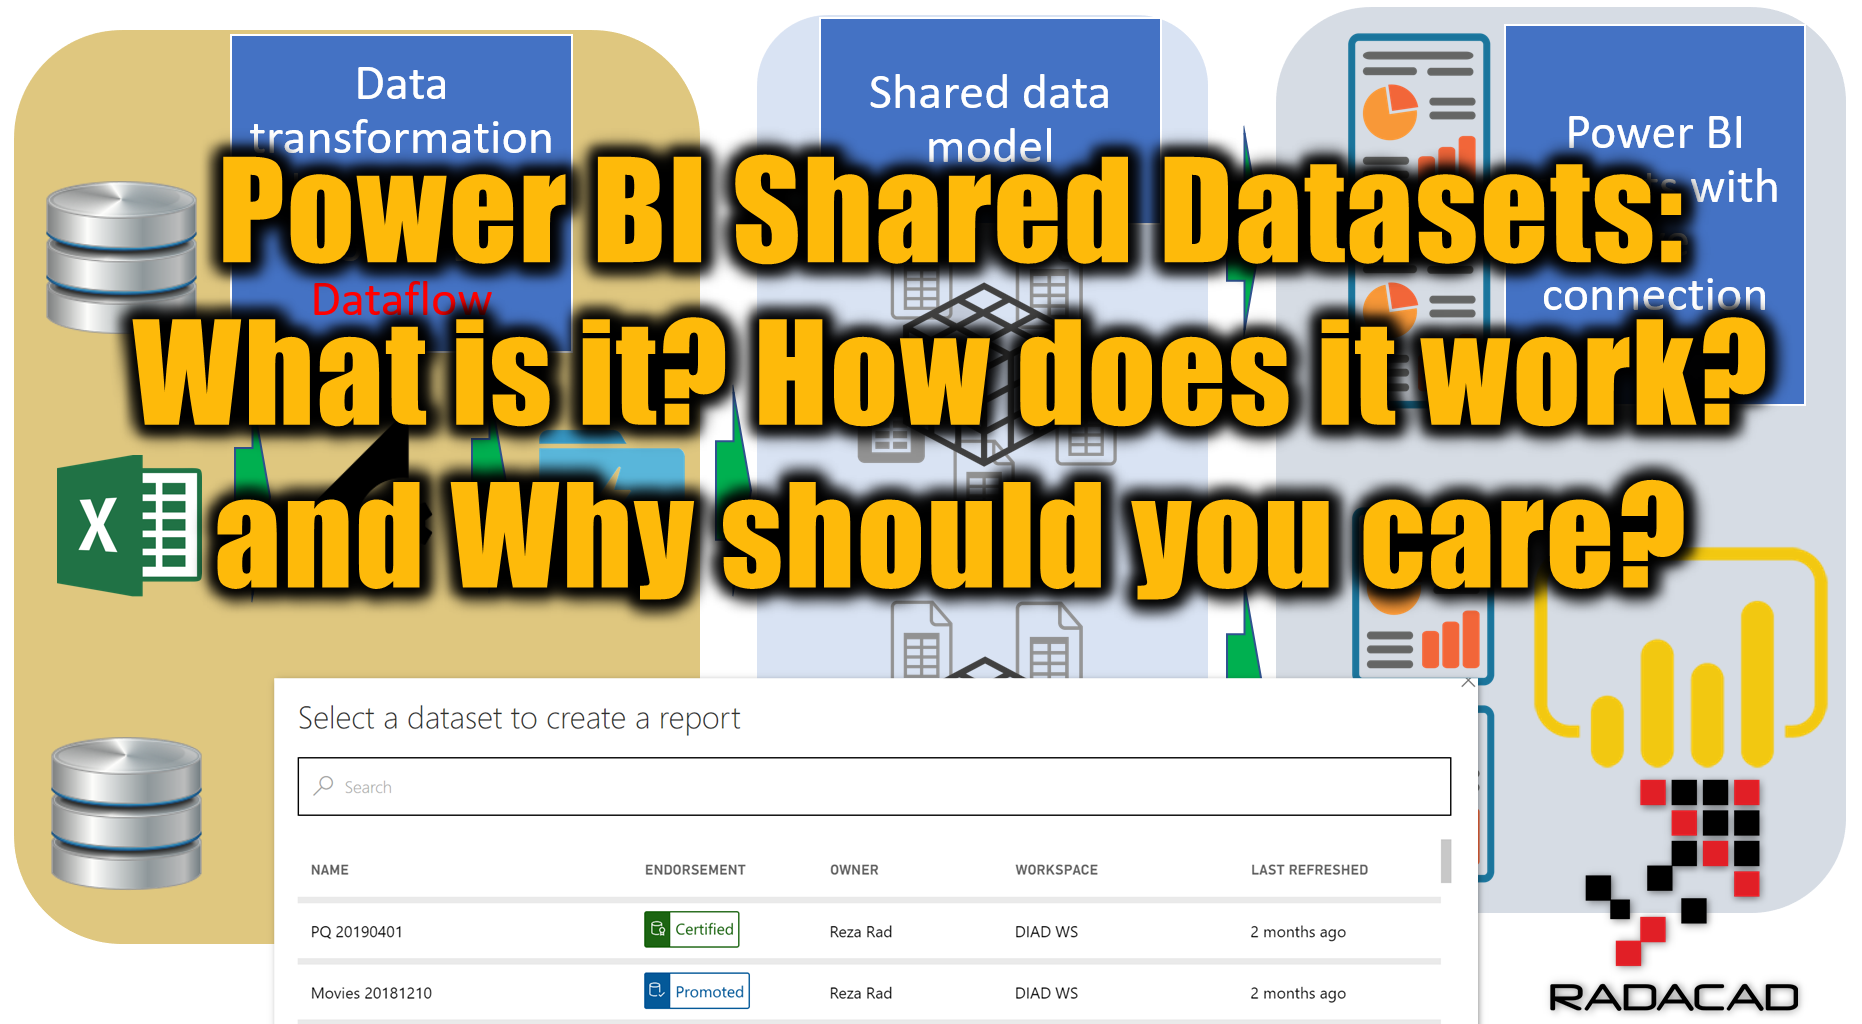 Power BI Shared Datasets: What is it? How does it work? and Why should you care?